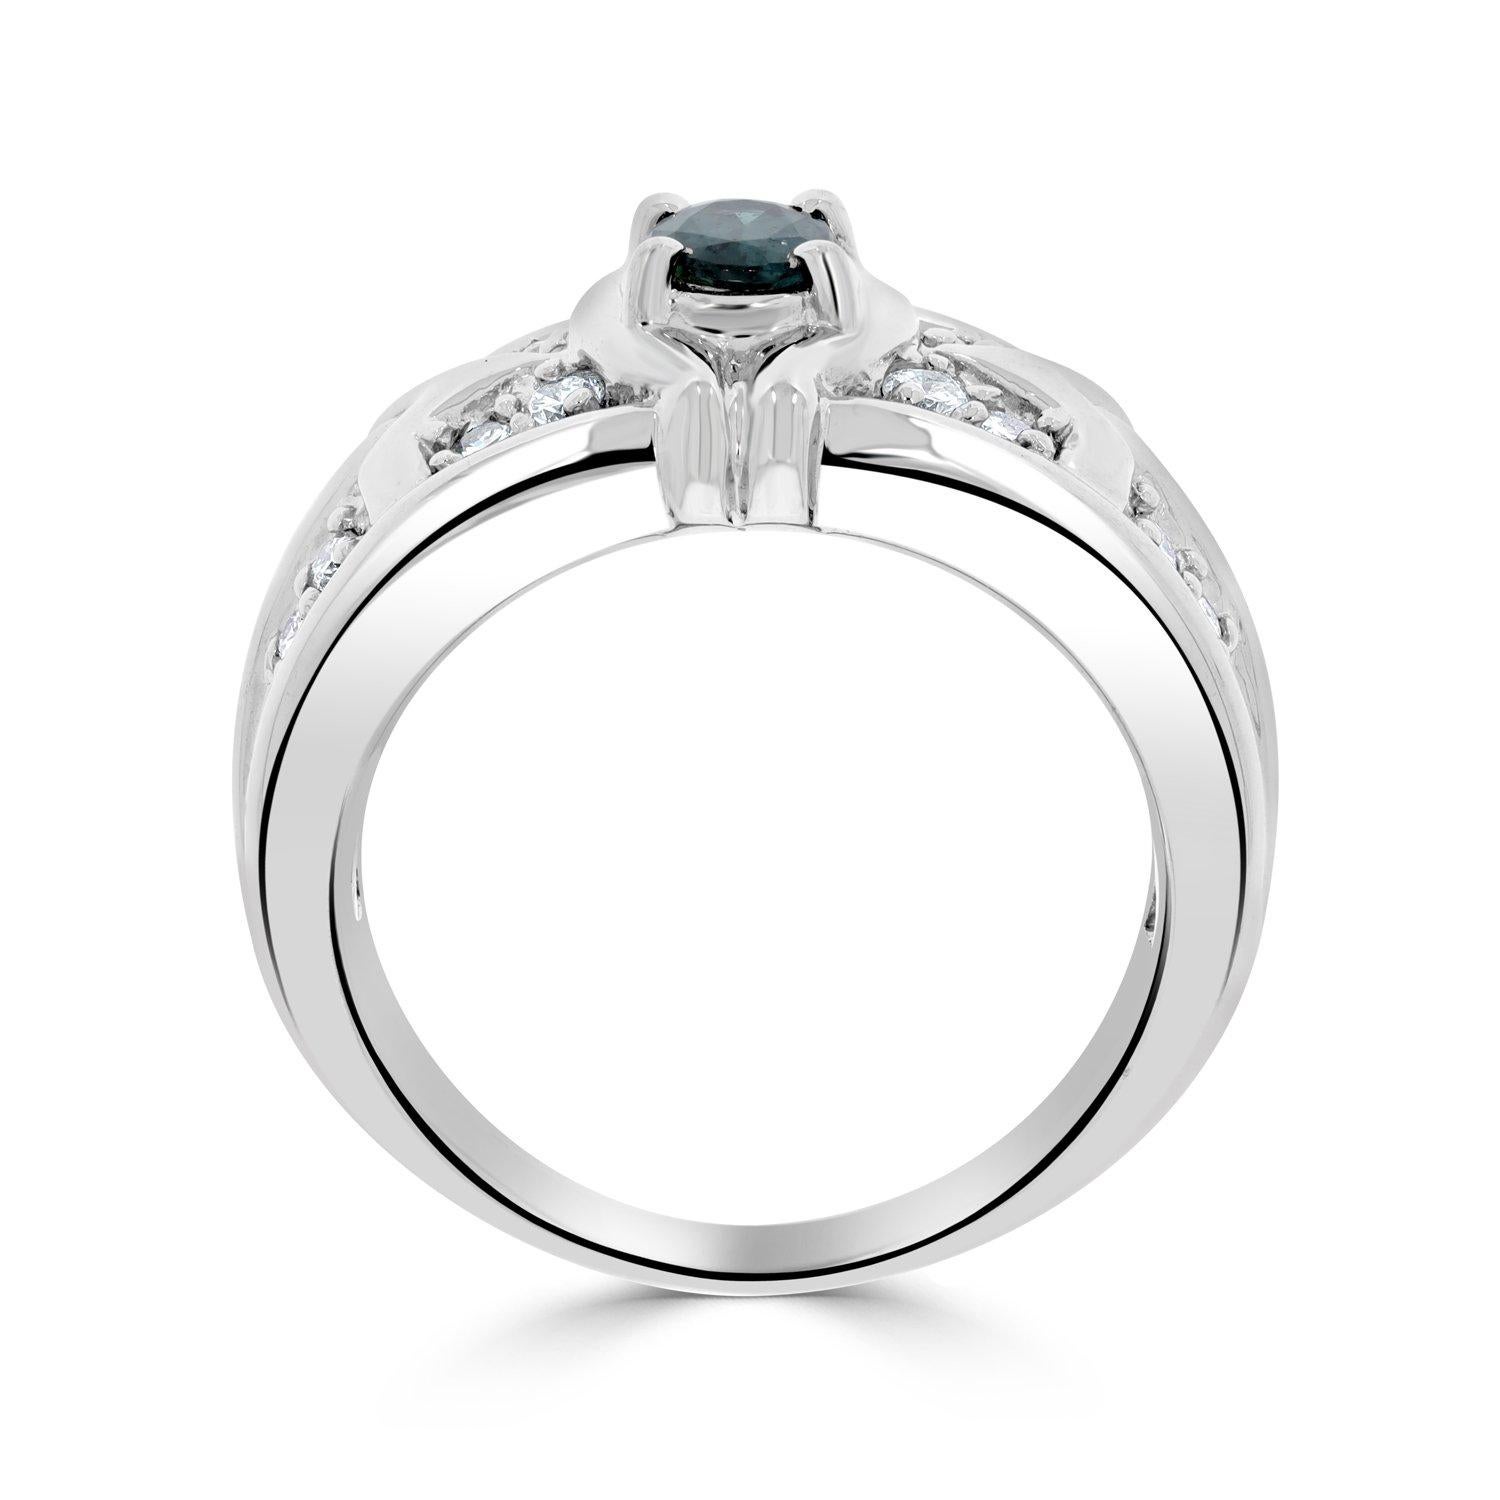 0.41ct Alexandrite Rings with 0.33tct Diamonds Set in Platinum 900 For Sale 1